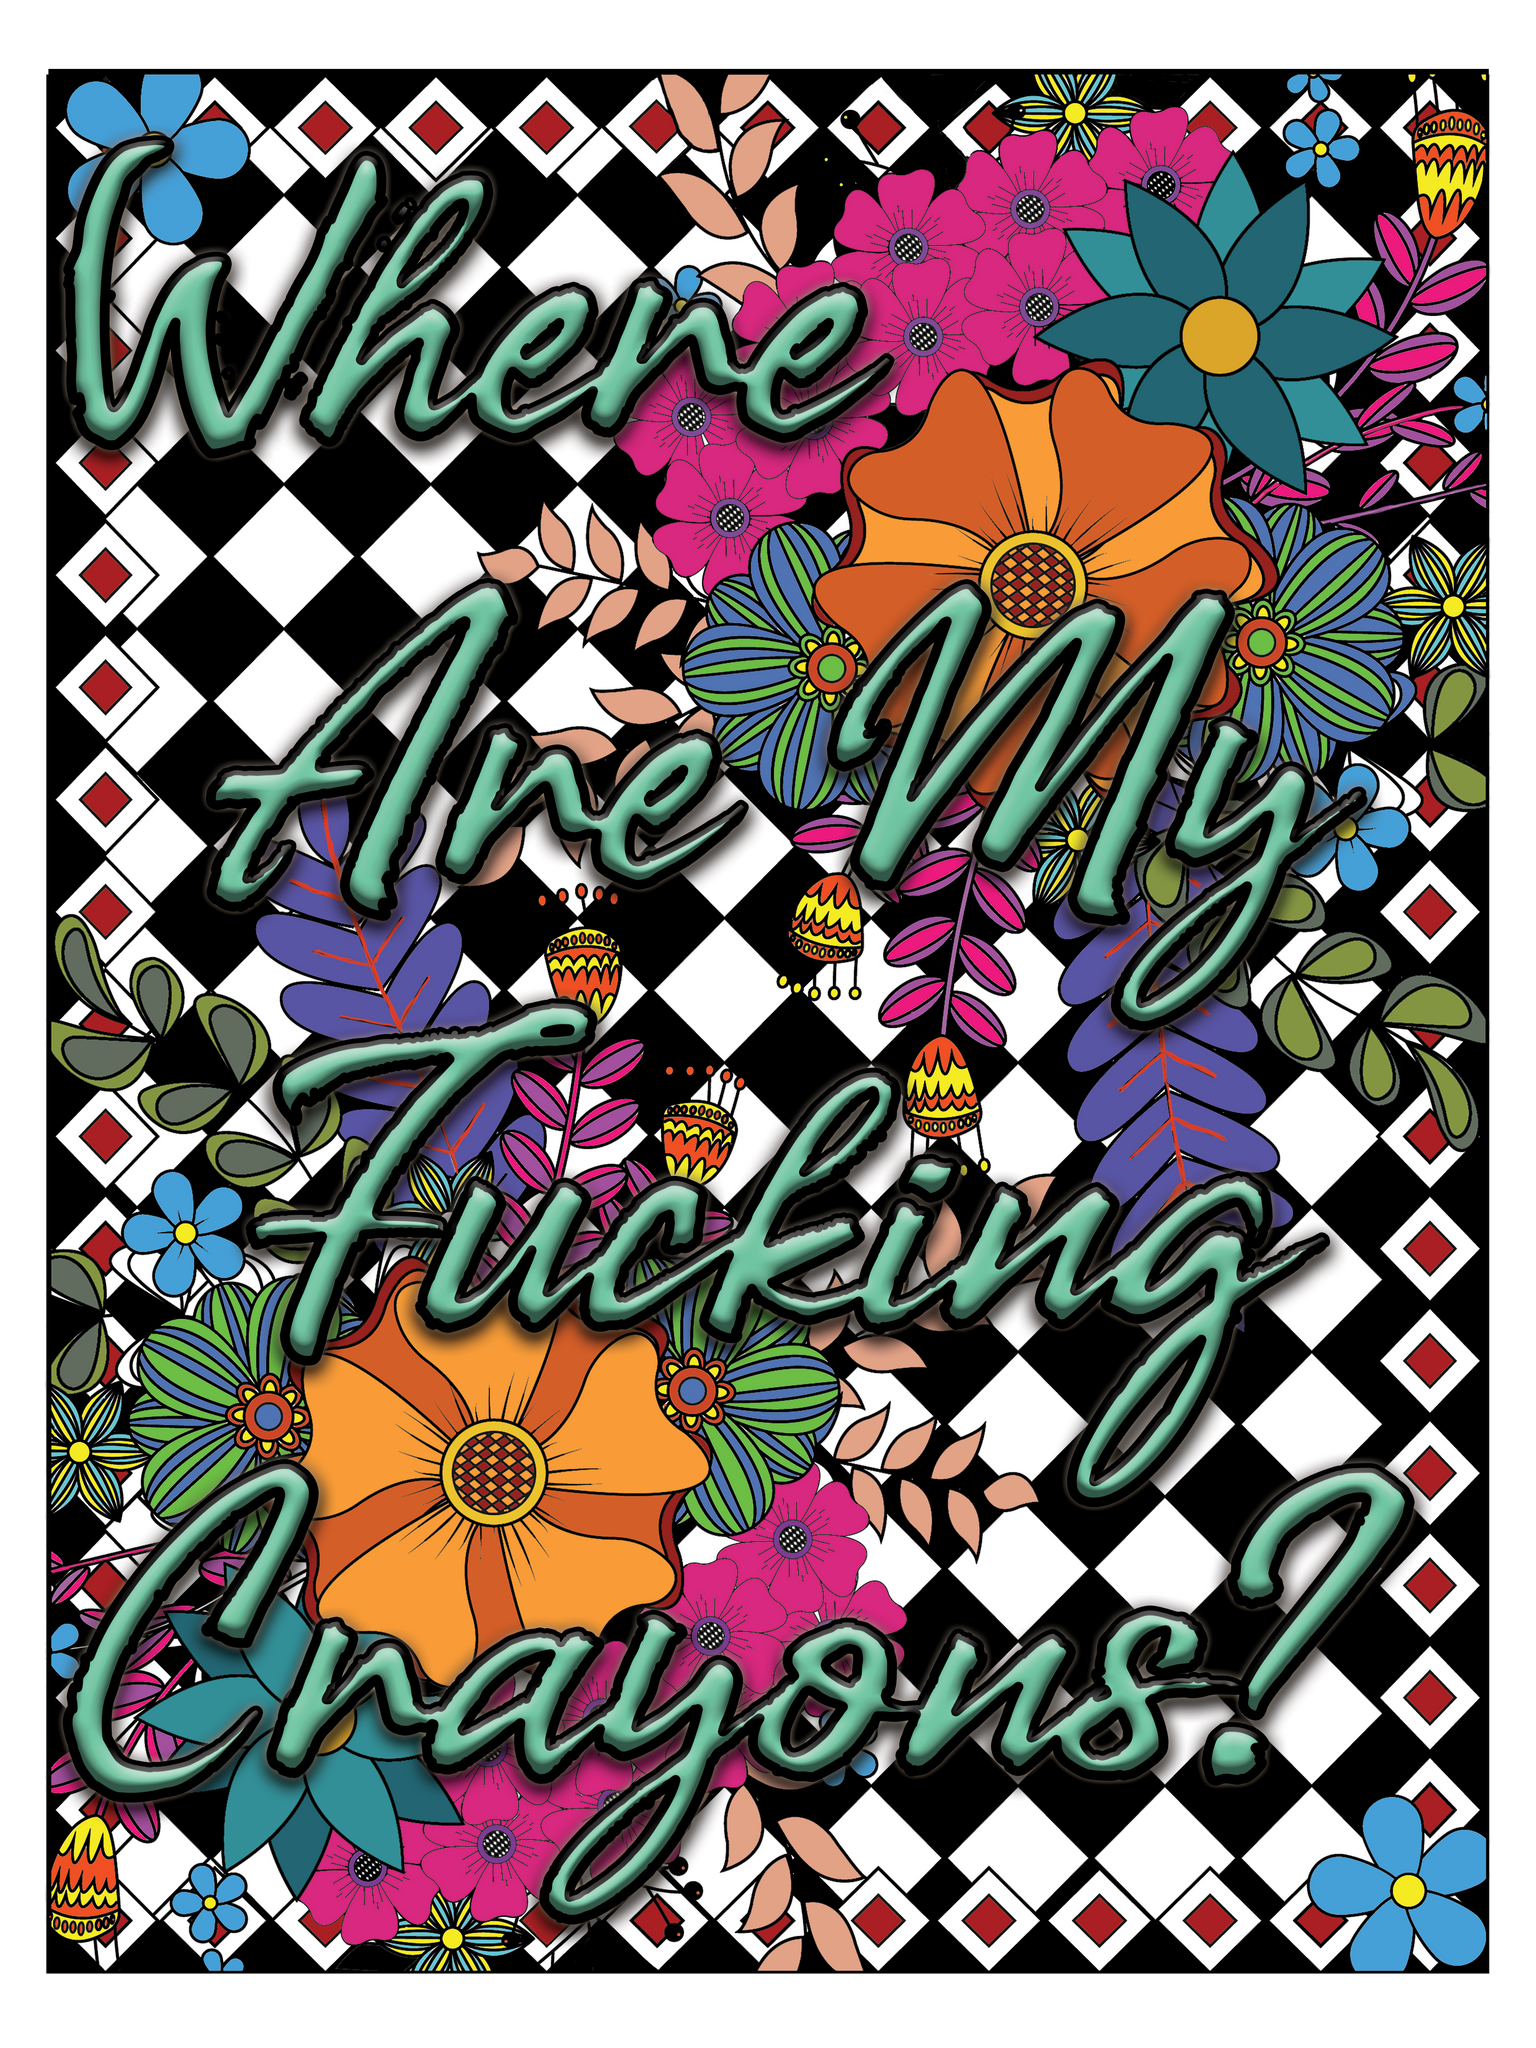 Where Are My Fucking Crayons? Adult Swear Words Coloring Book – Twisted  Chicken Homestead